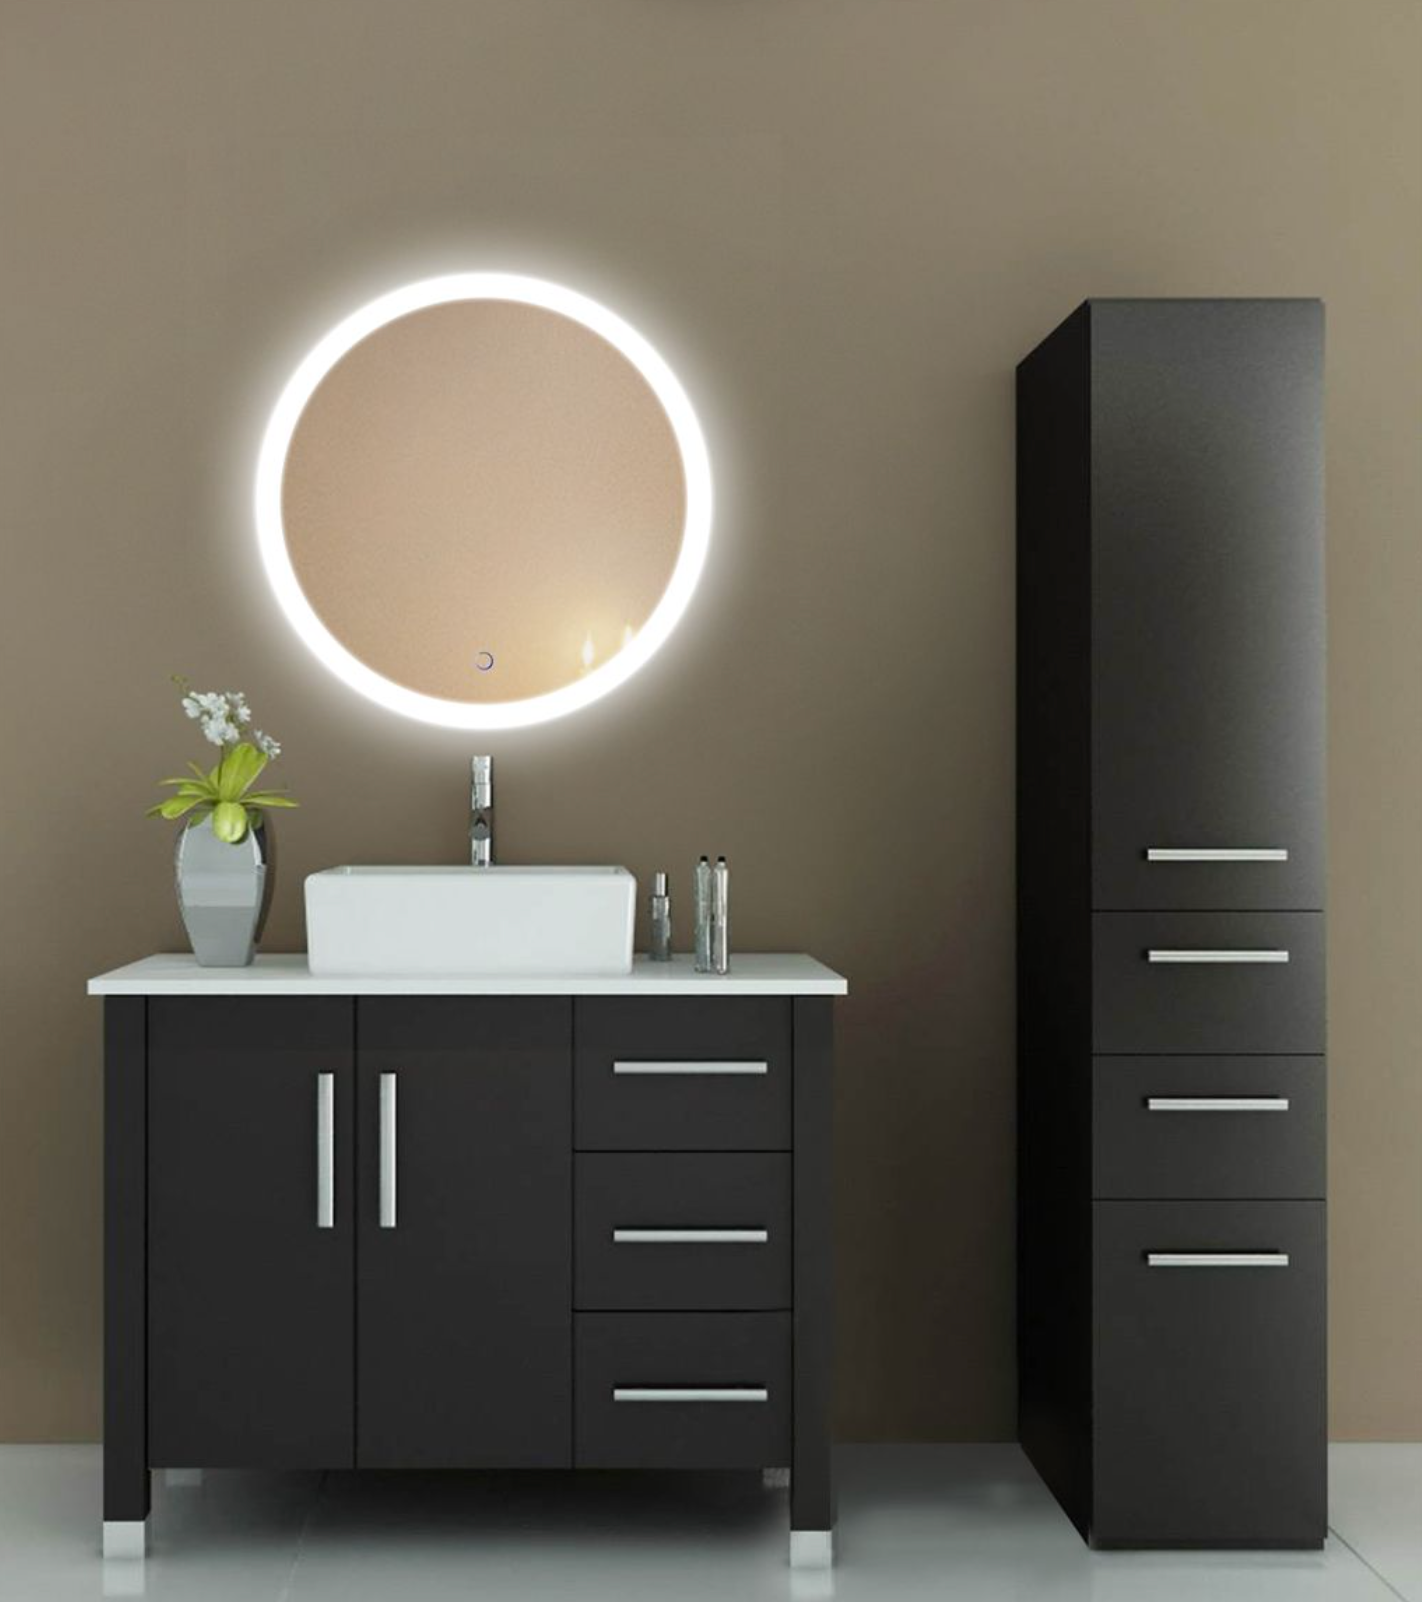 ICON 24" Round LED Mirror with Defogger